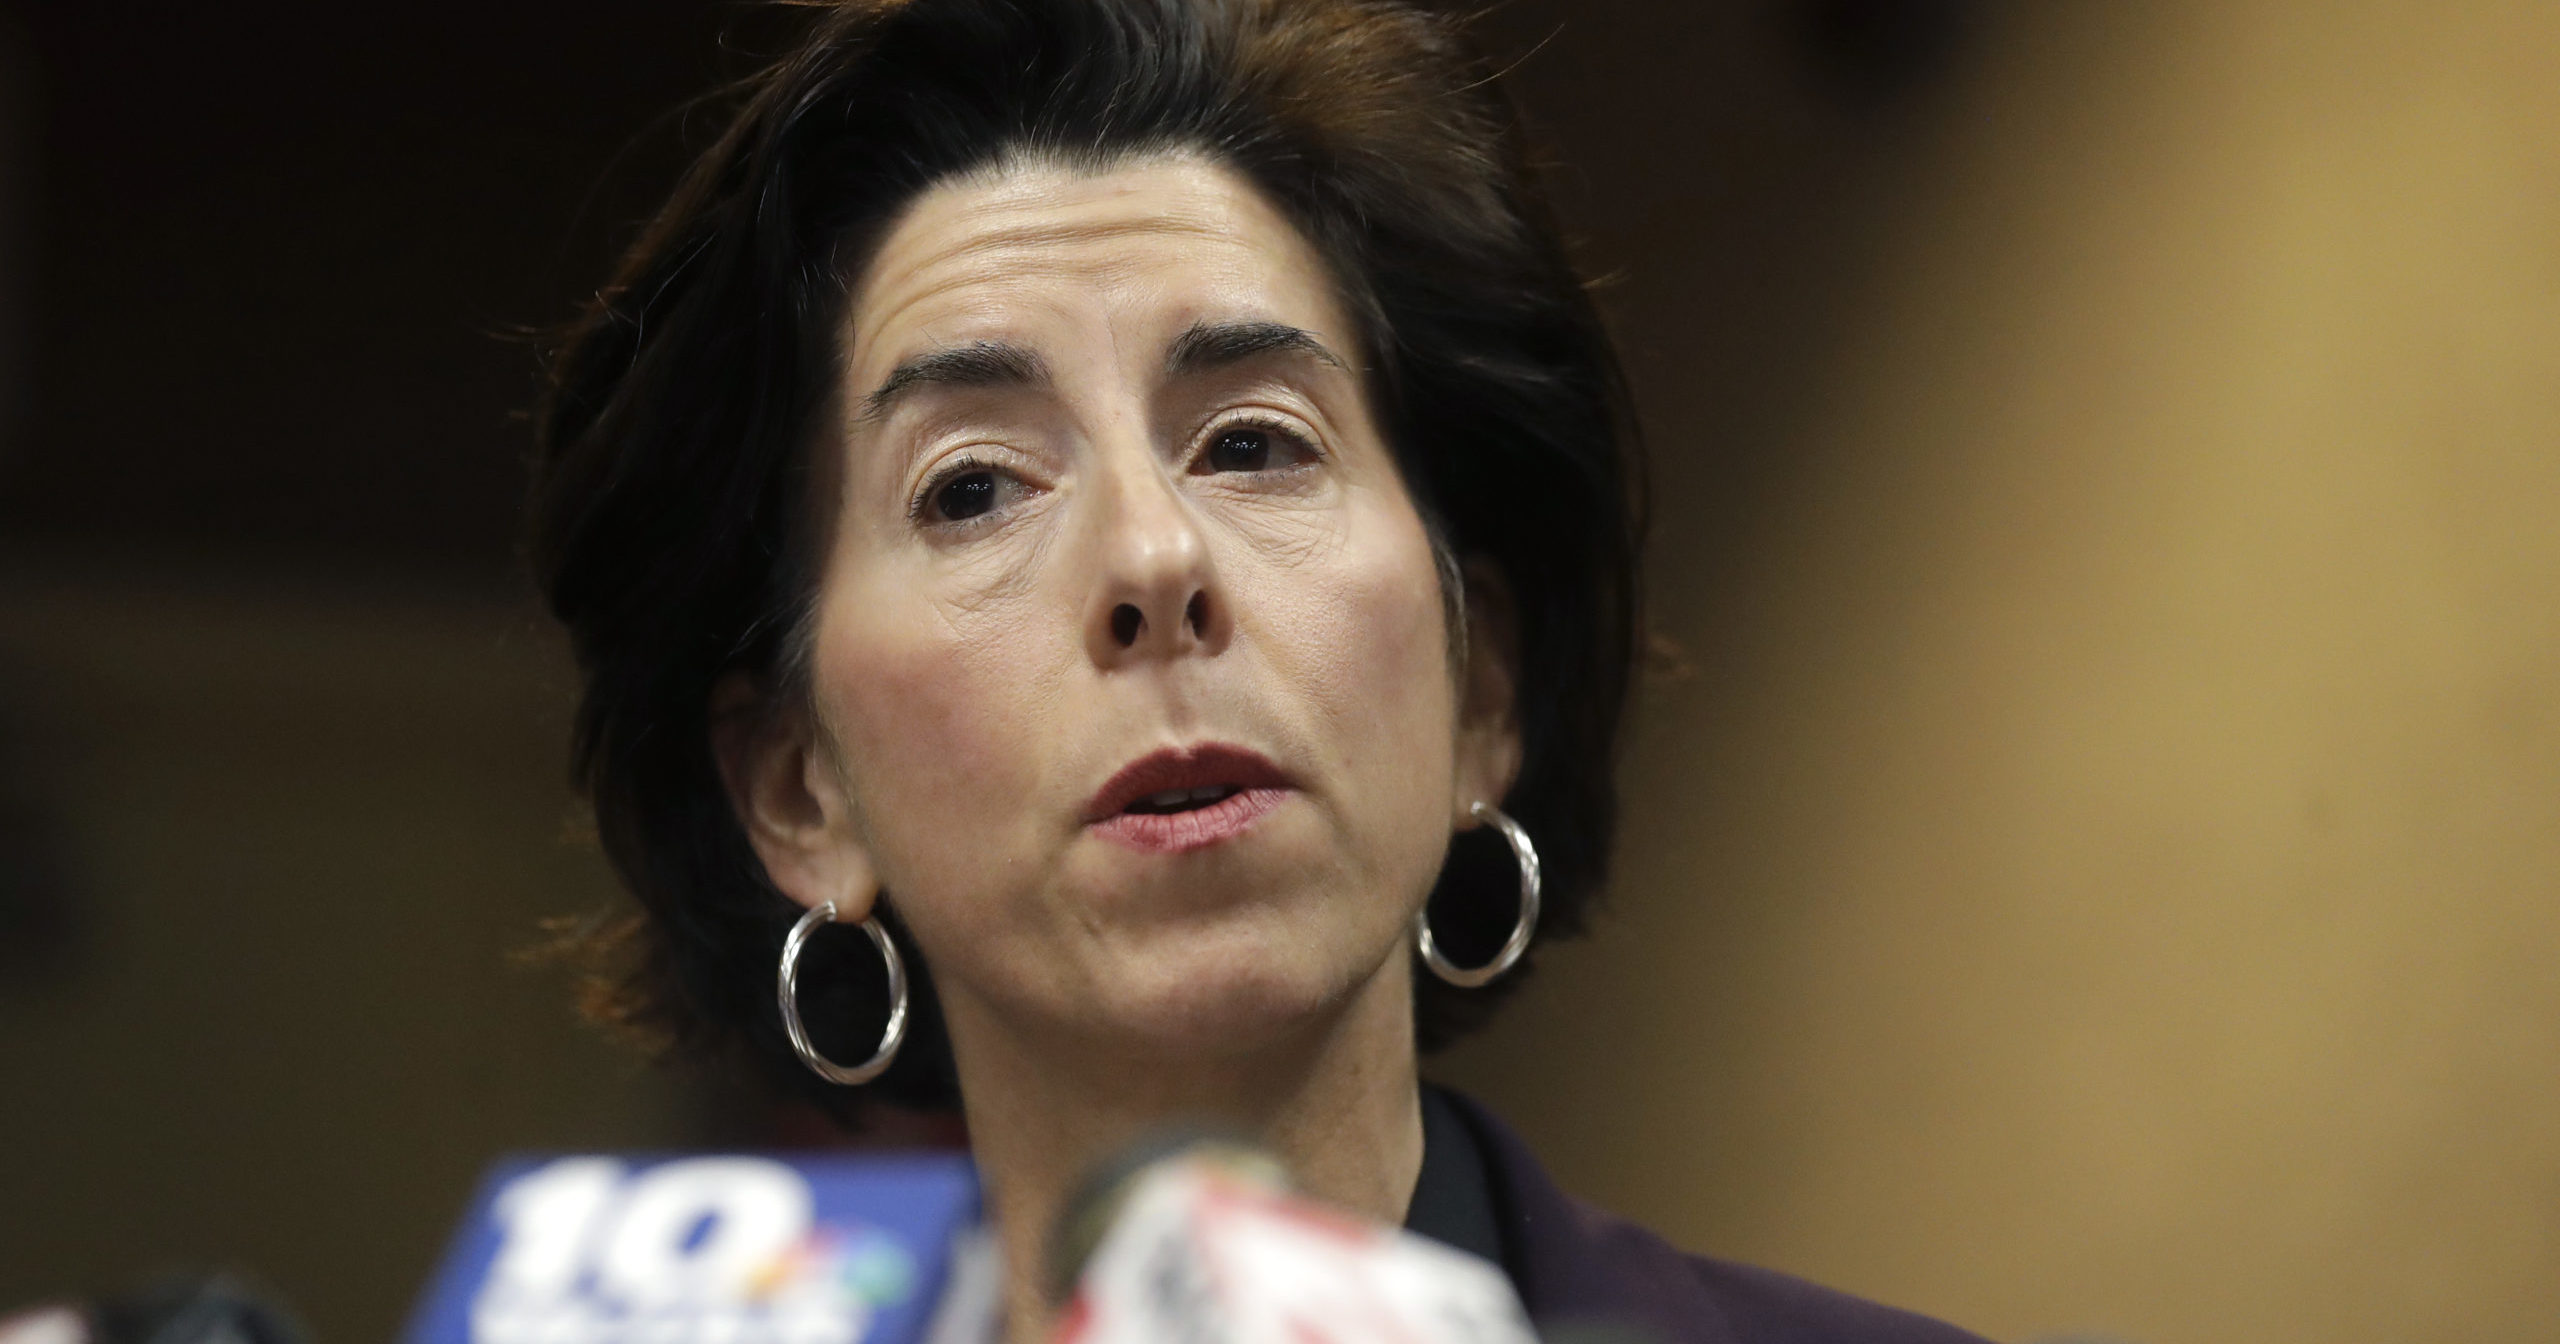 Rhode Island Gov. Gina Raimondo speaks during a news conference on March 1, 2020, in Providence, Rhode Island.